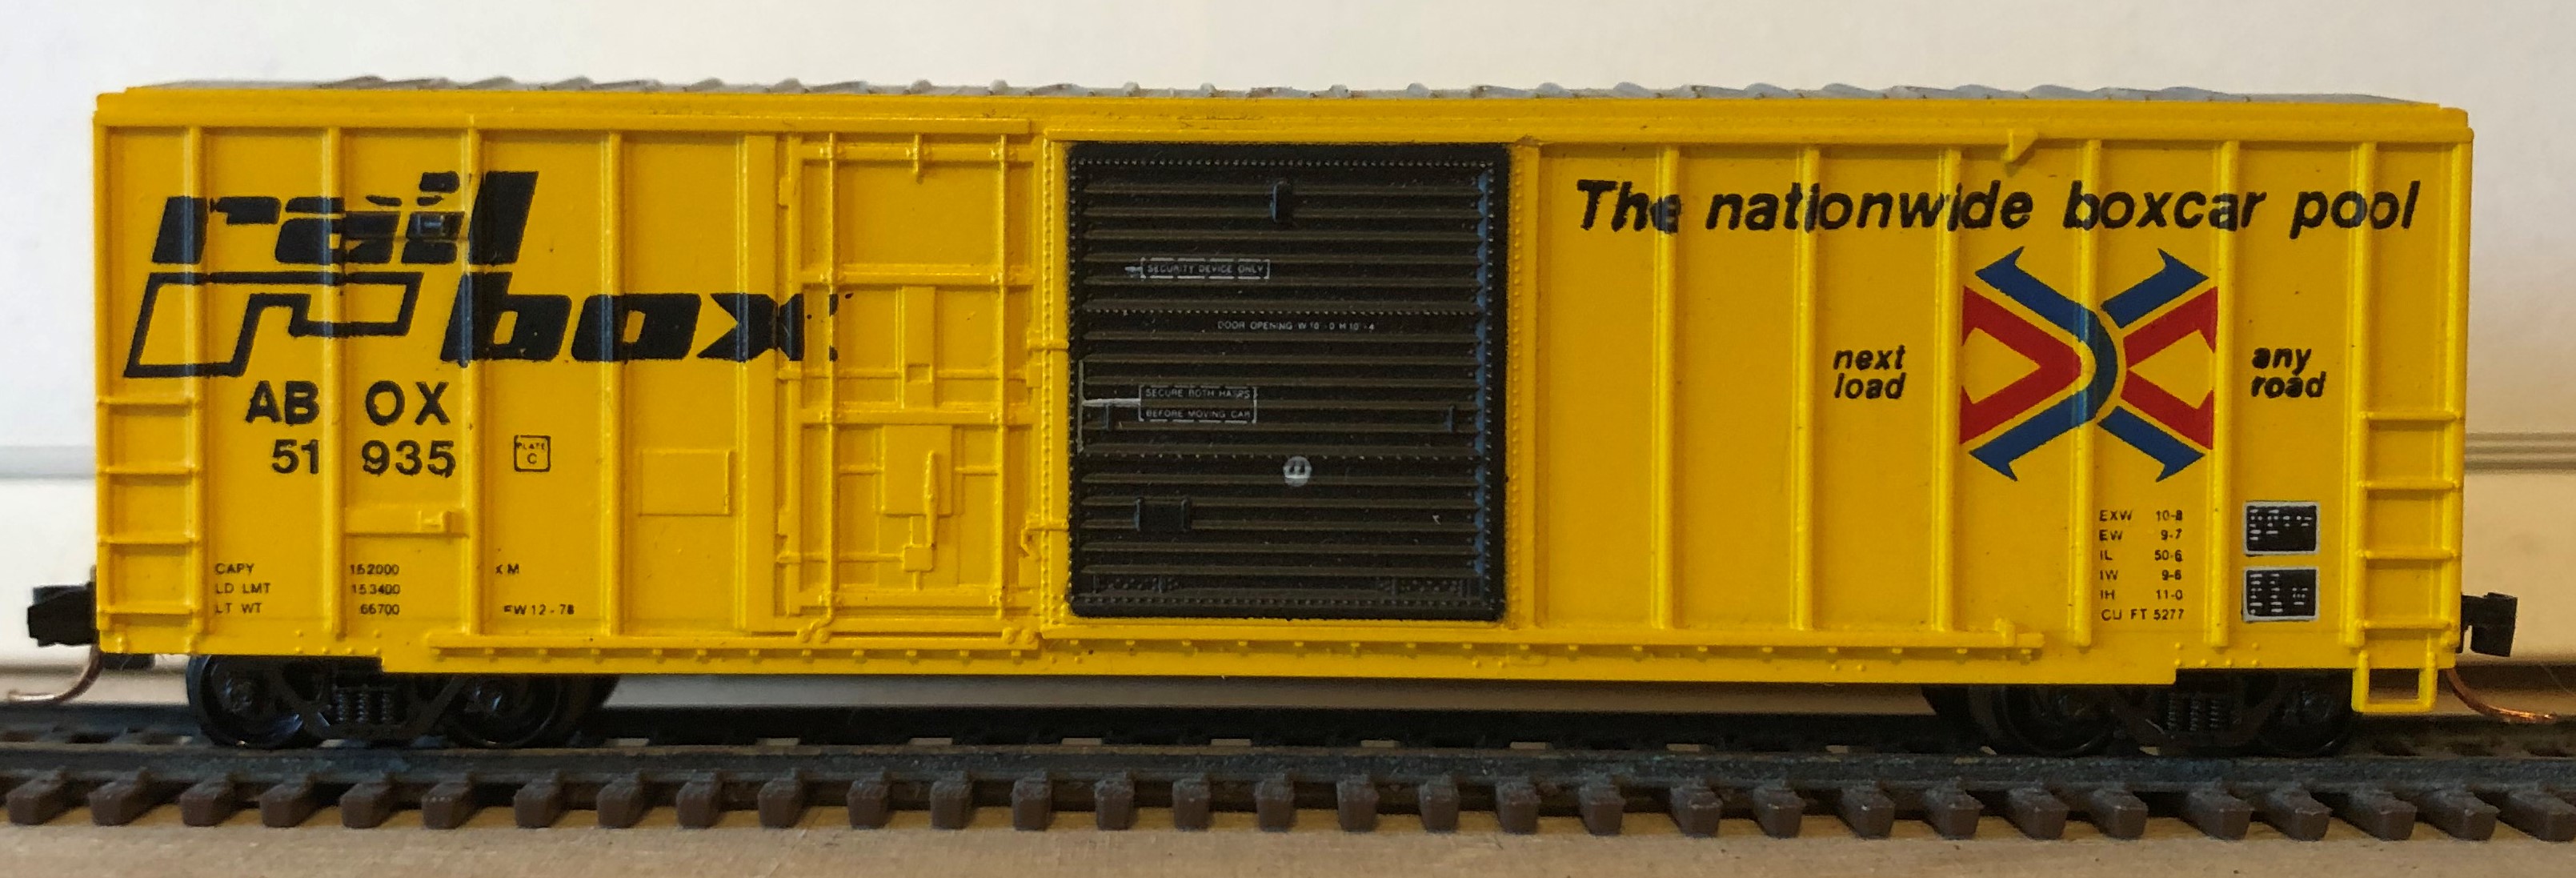 N Scale - Roundhouse - 8231 - Boxcar, 50 Foot, FMC, 5077 - RailBox - 51935